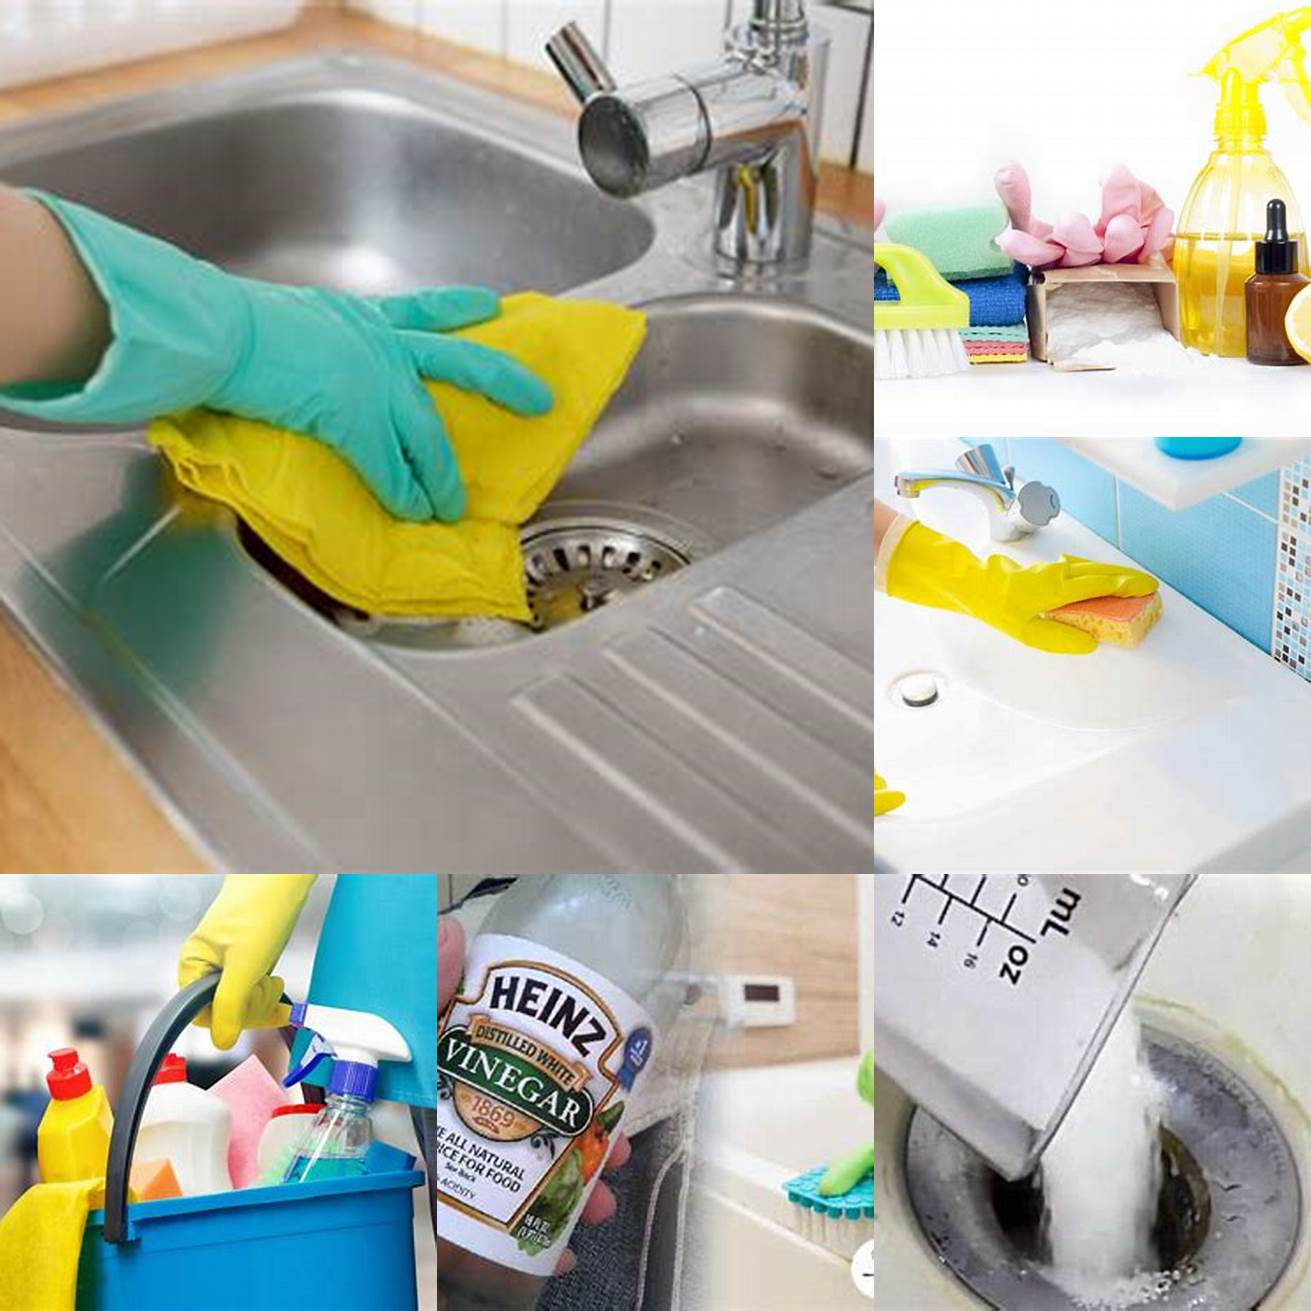 Avoid using harsh chemicals like bleach or ammonia to clean the sink as these can damage the finish Stick to mild cleaners like dish soap and vinegar